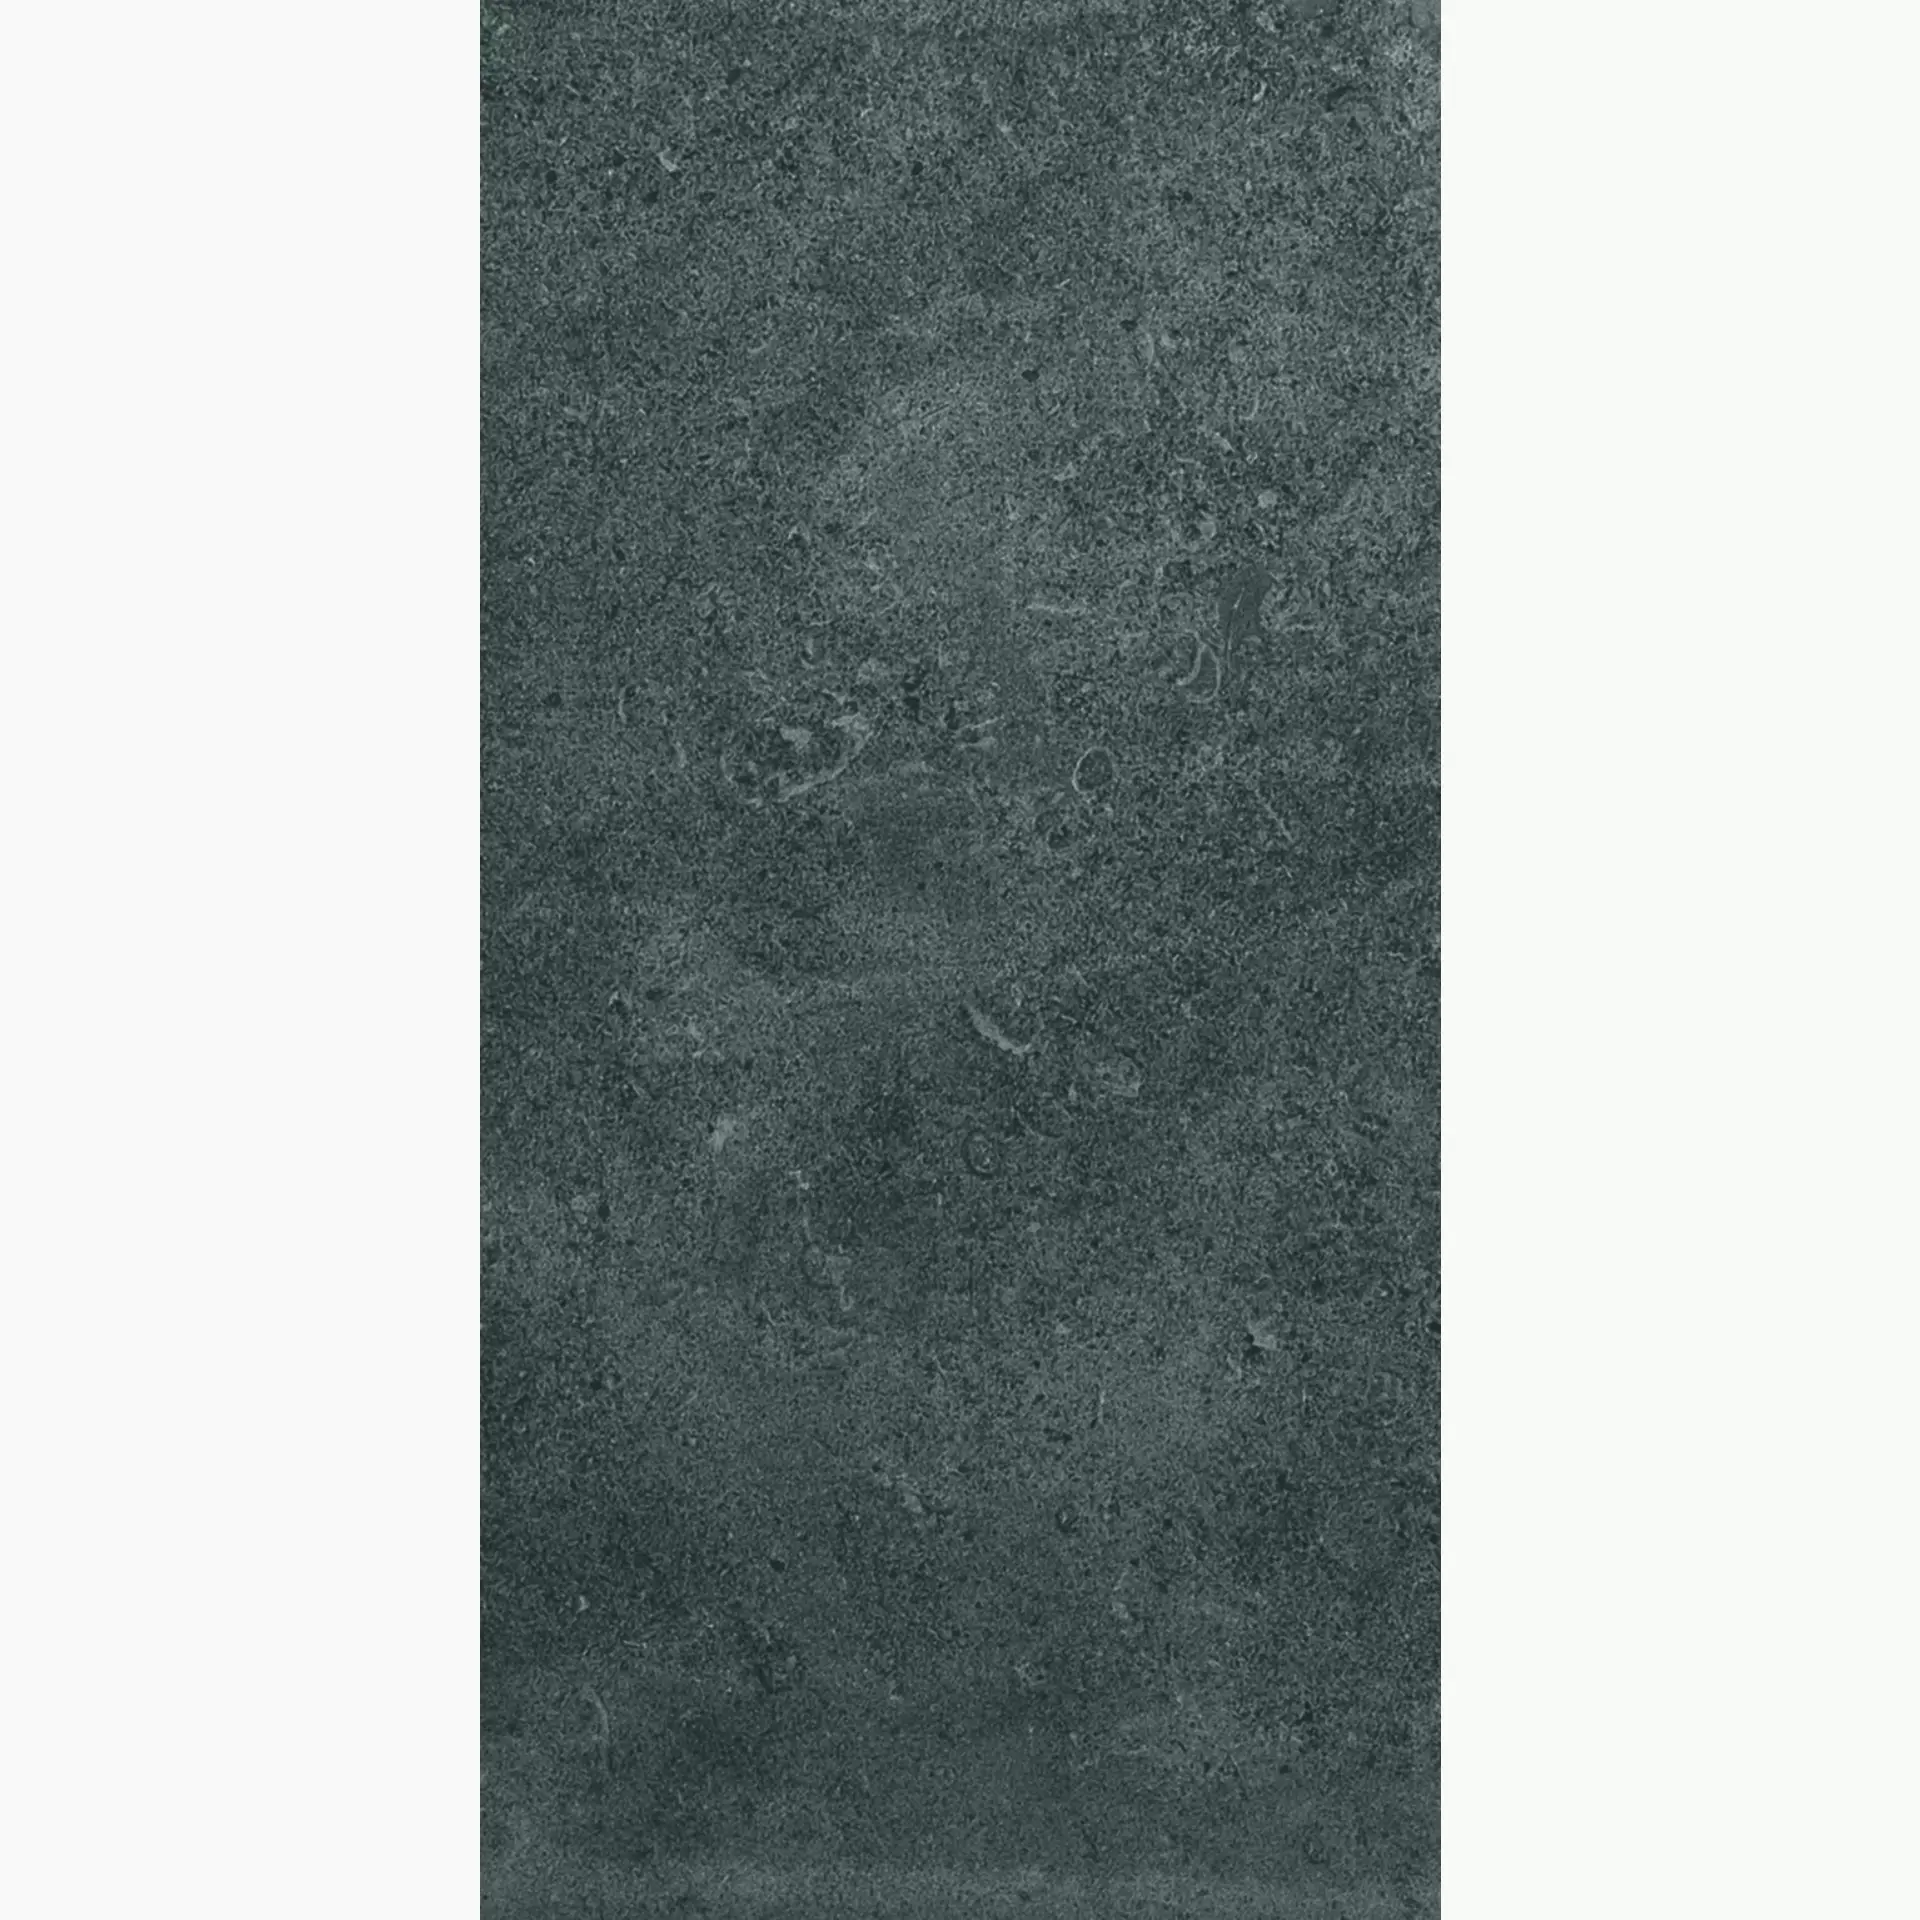 Refin Bricklane Grey Naturale NF21 30x60cm rectified 9mm